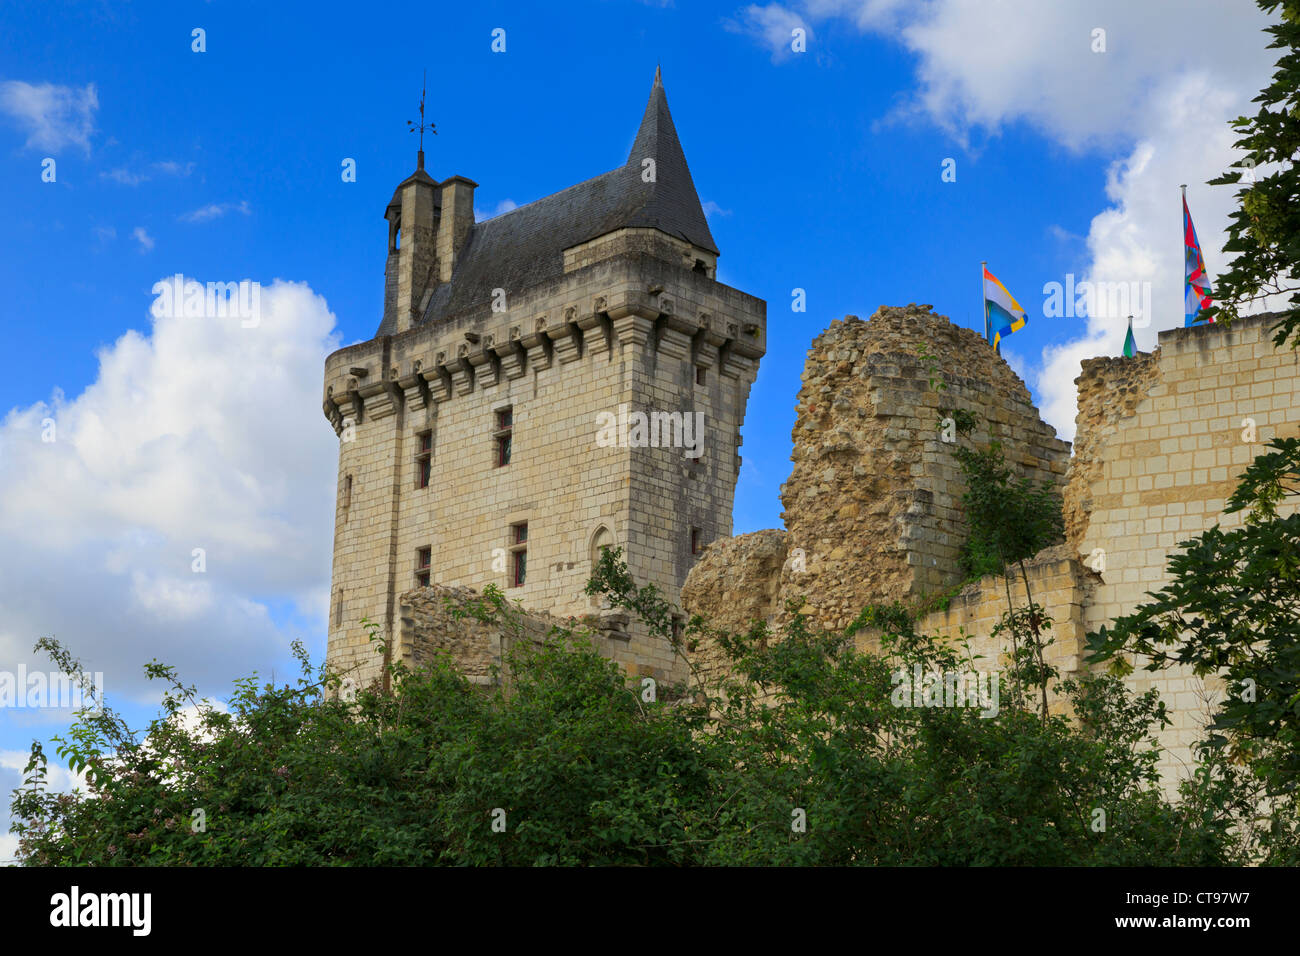 Tour de l'Horloge, Chateau Chinon, Loire Valley, France. The medieval clock tower is now the entrance to the castle. Stock Photo